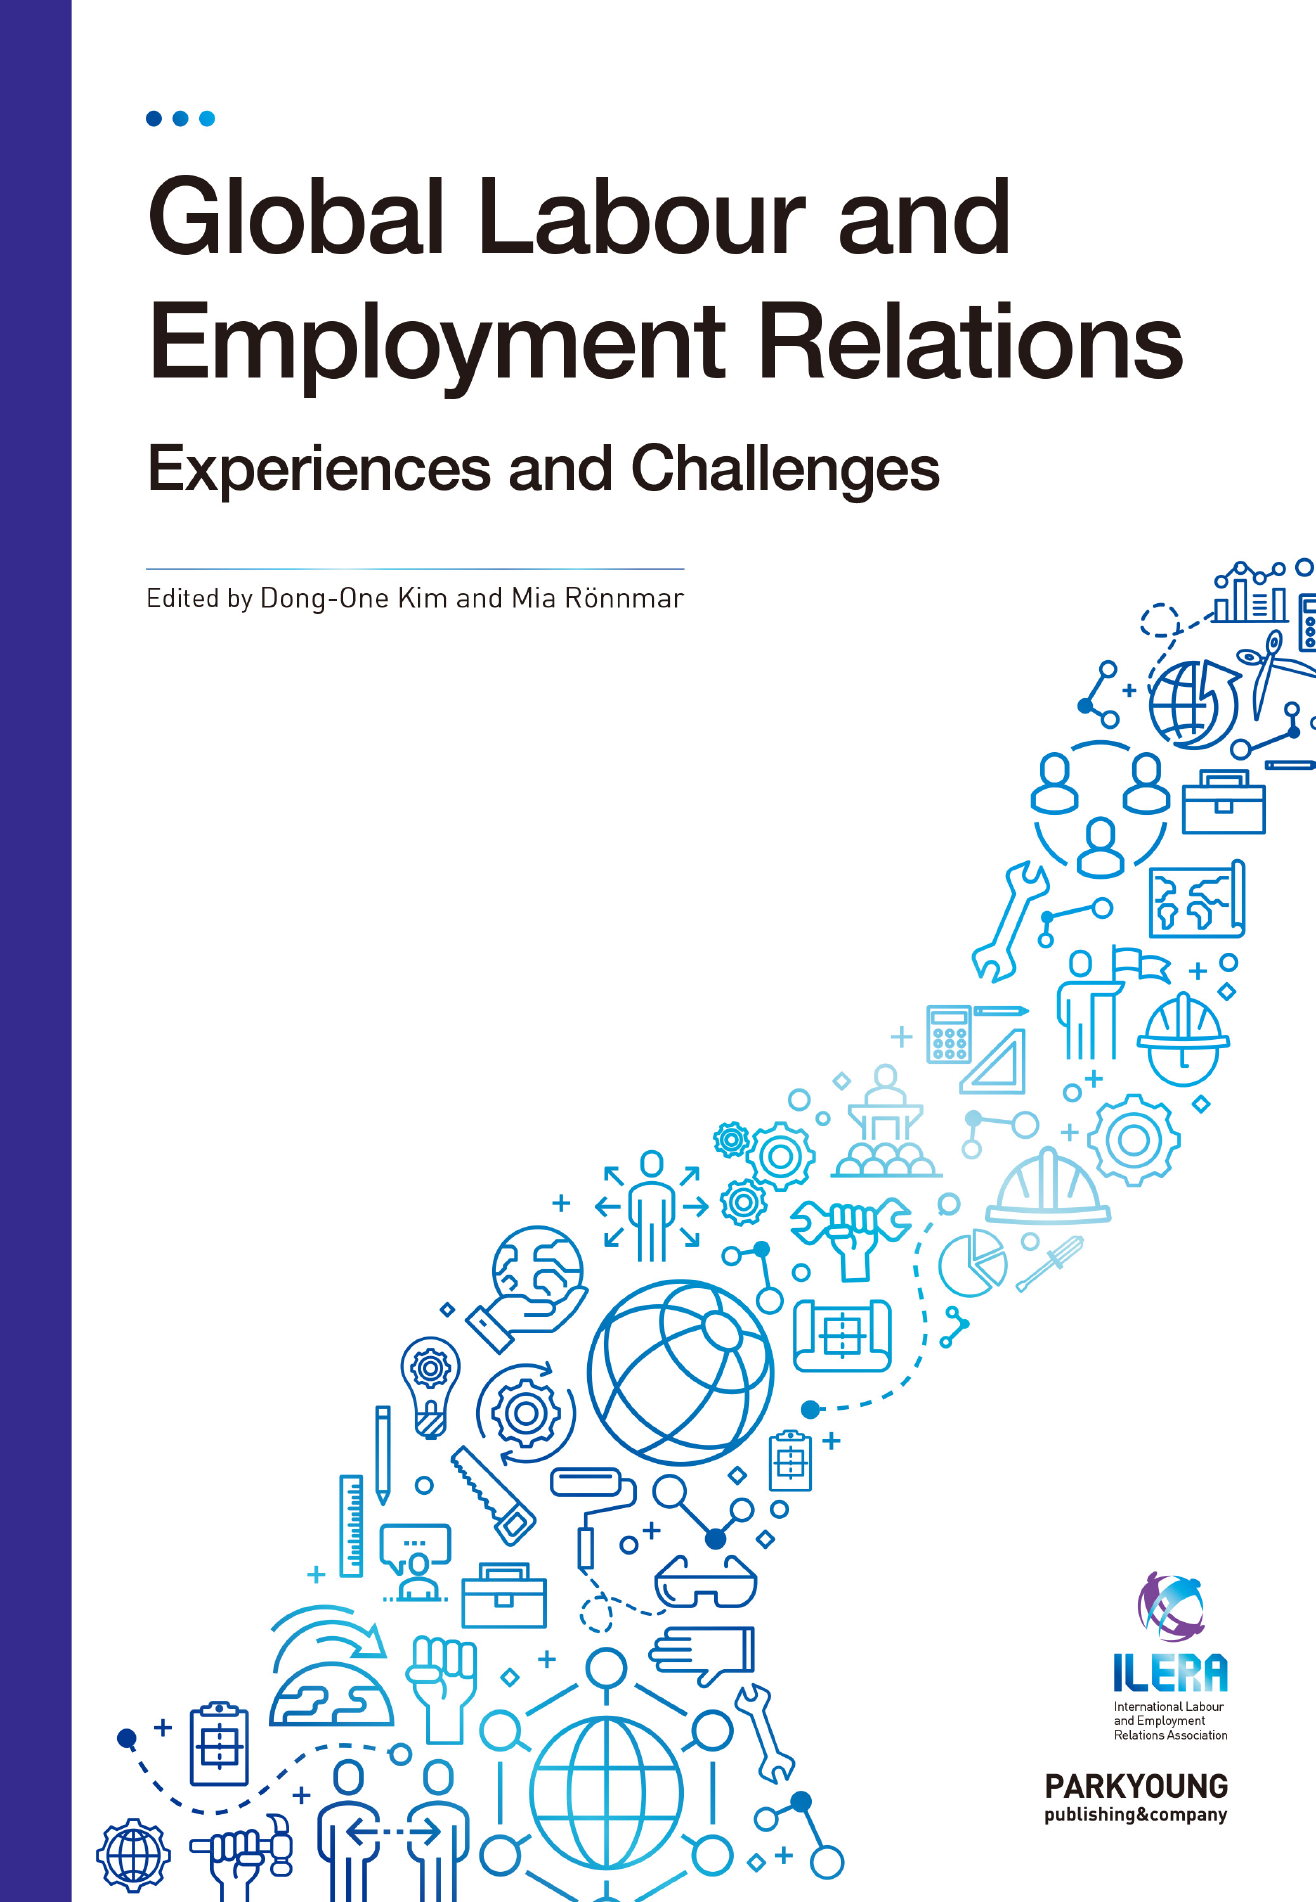 GLOBAL LABOUR AND EMPLOYMENT RELATIONS